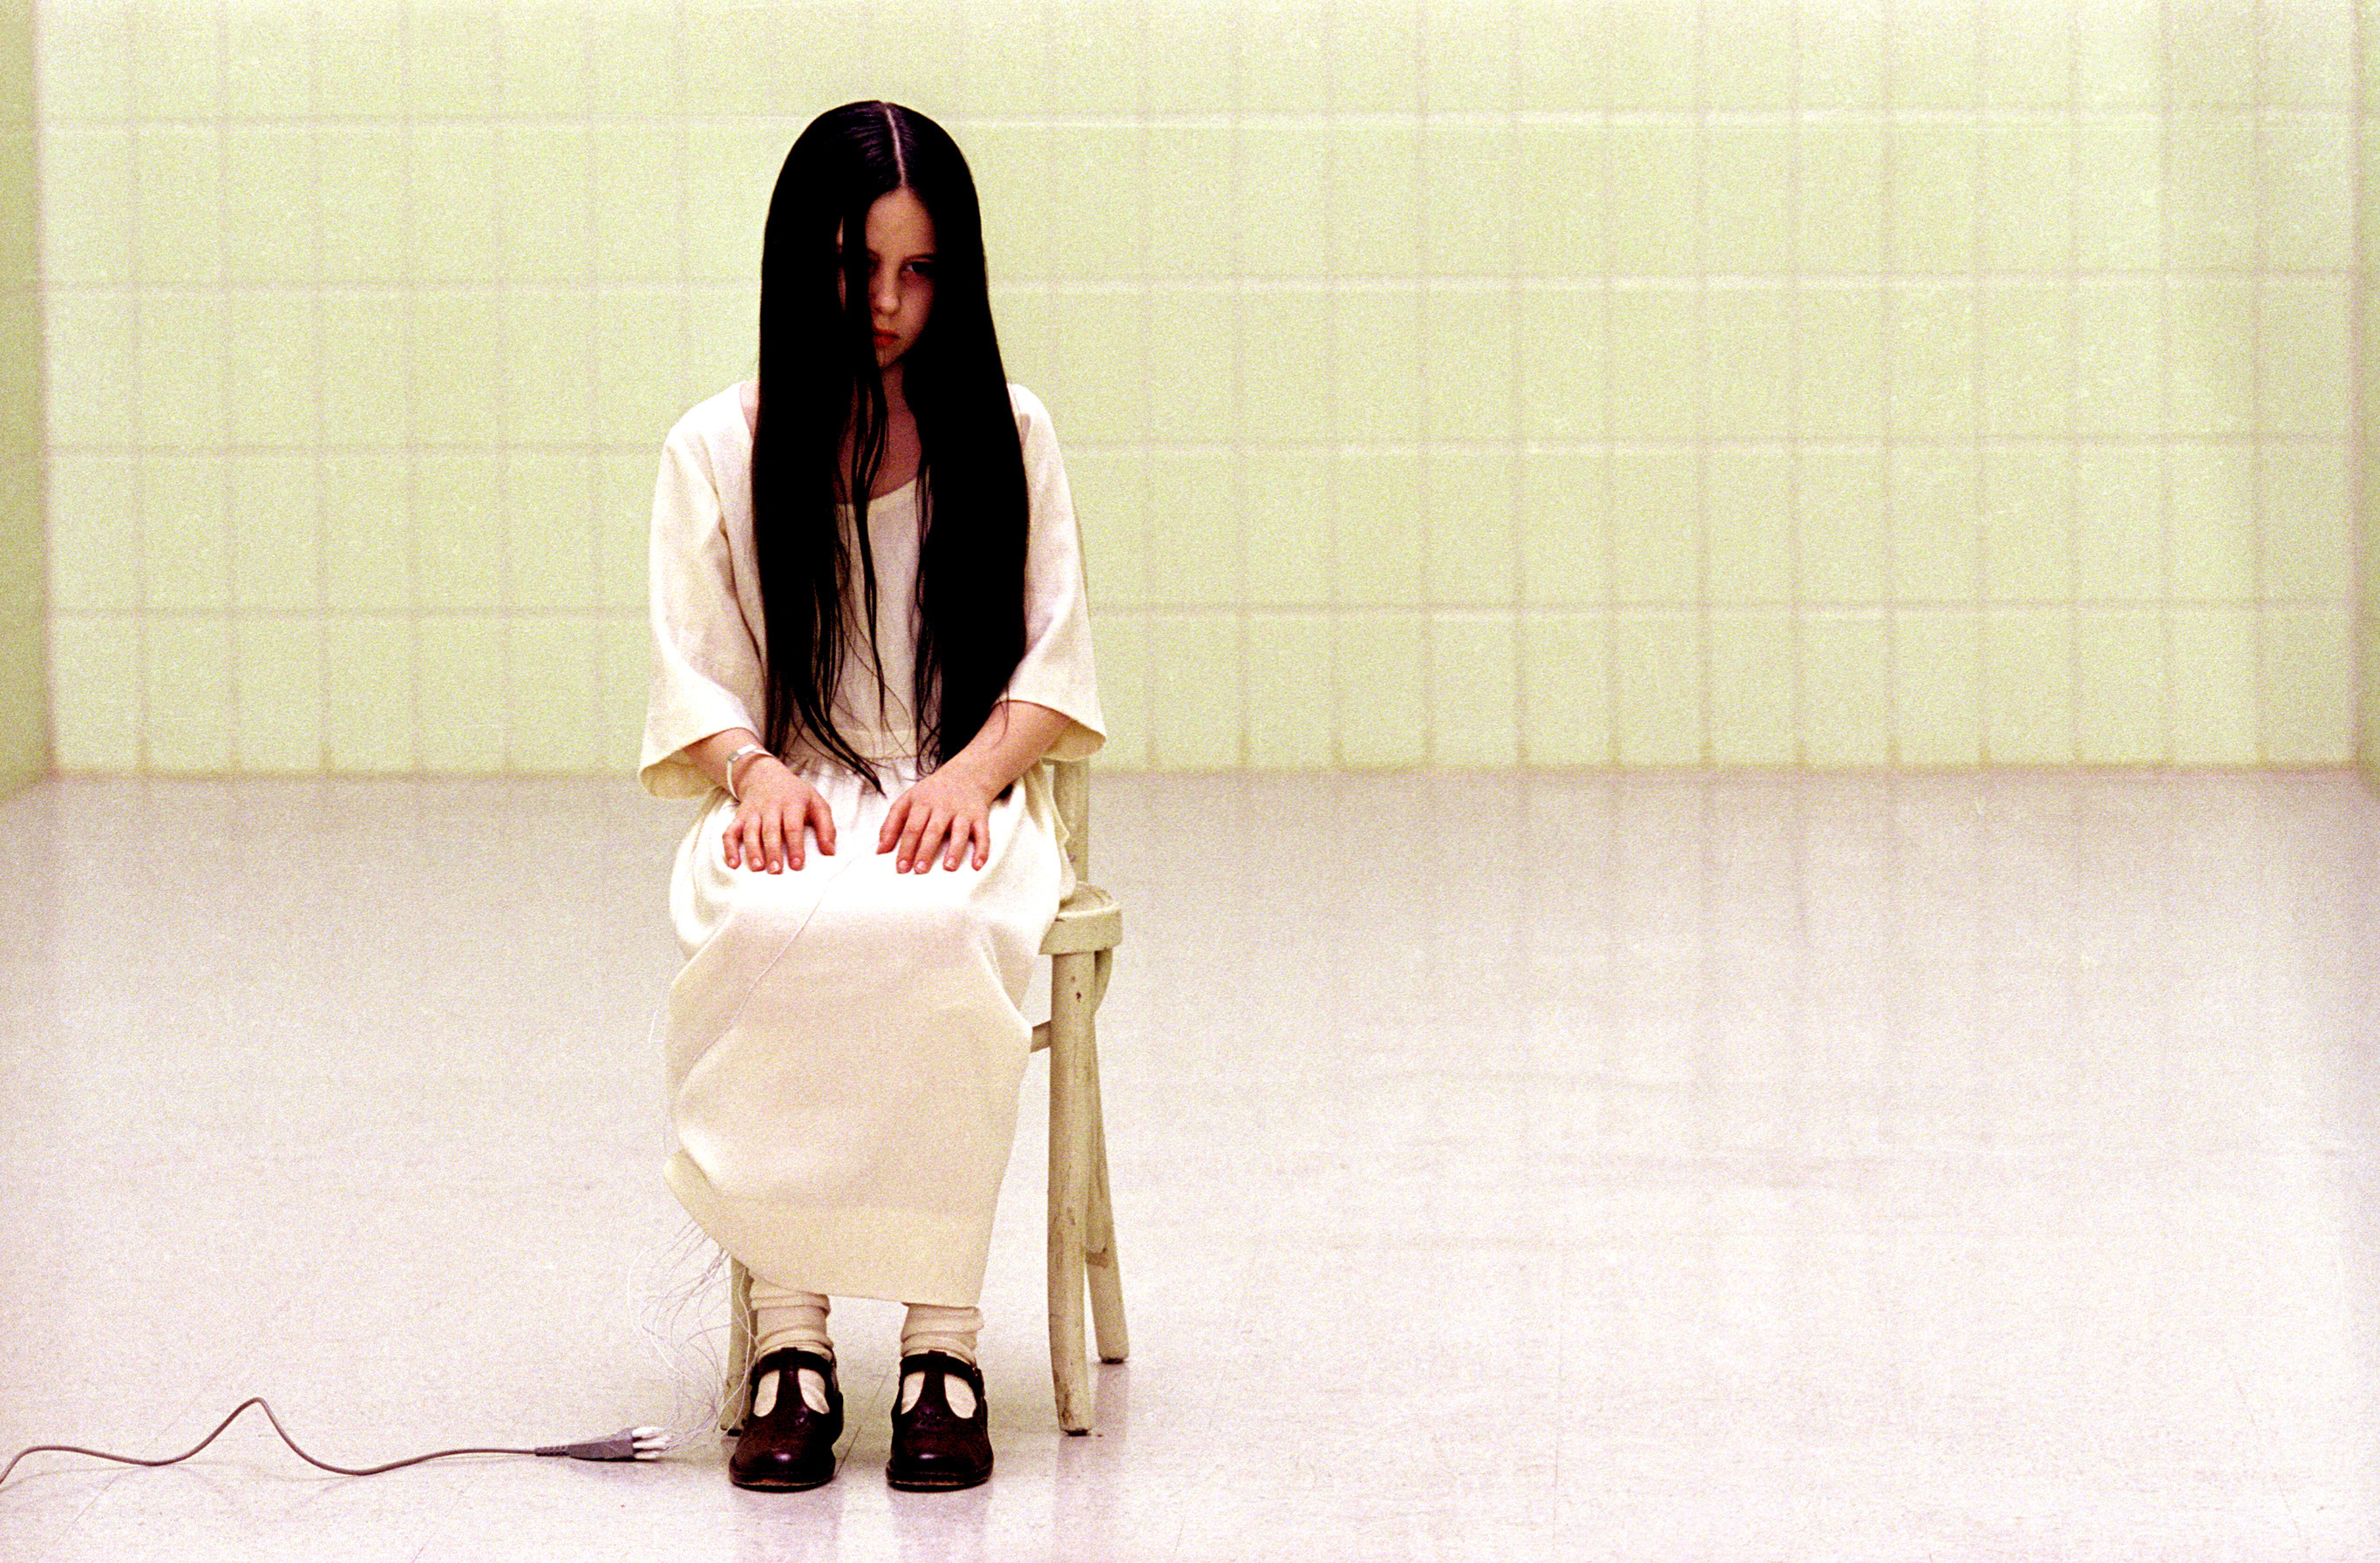 Daveigh Chase sits in a chair with long hair